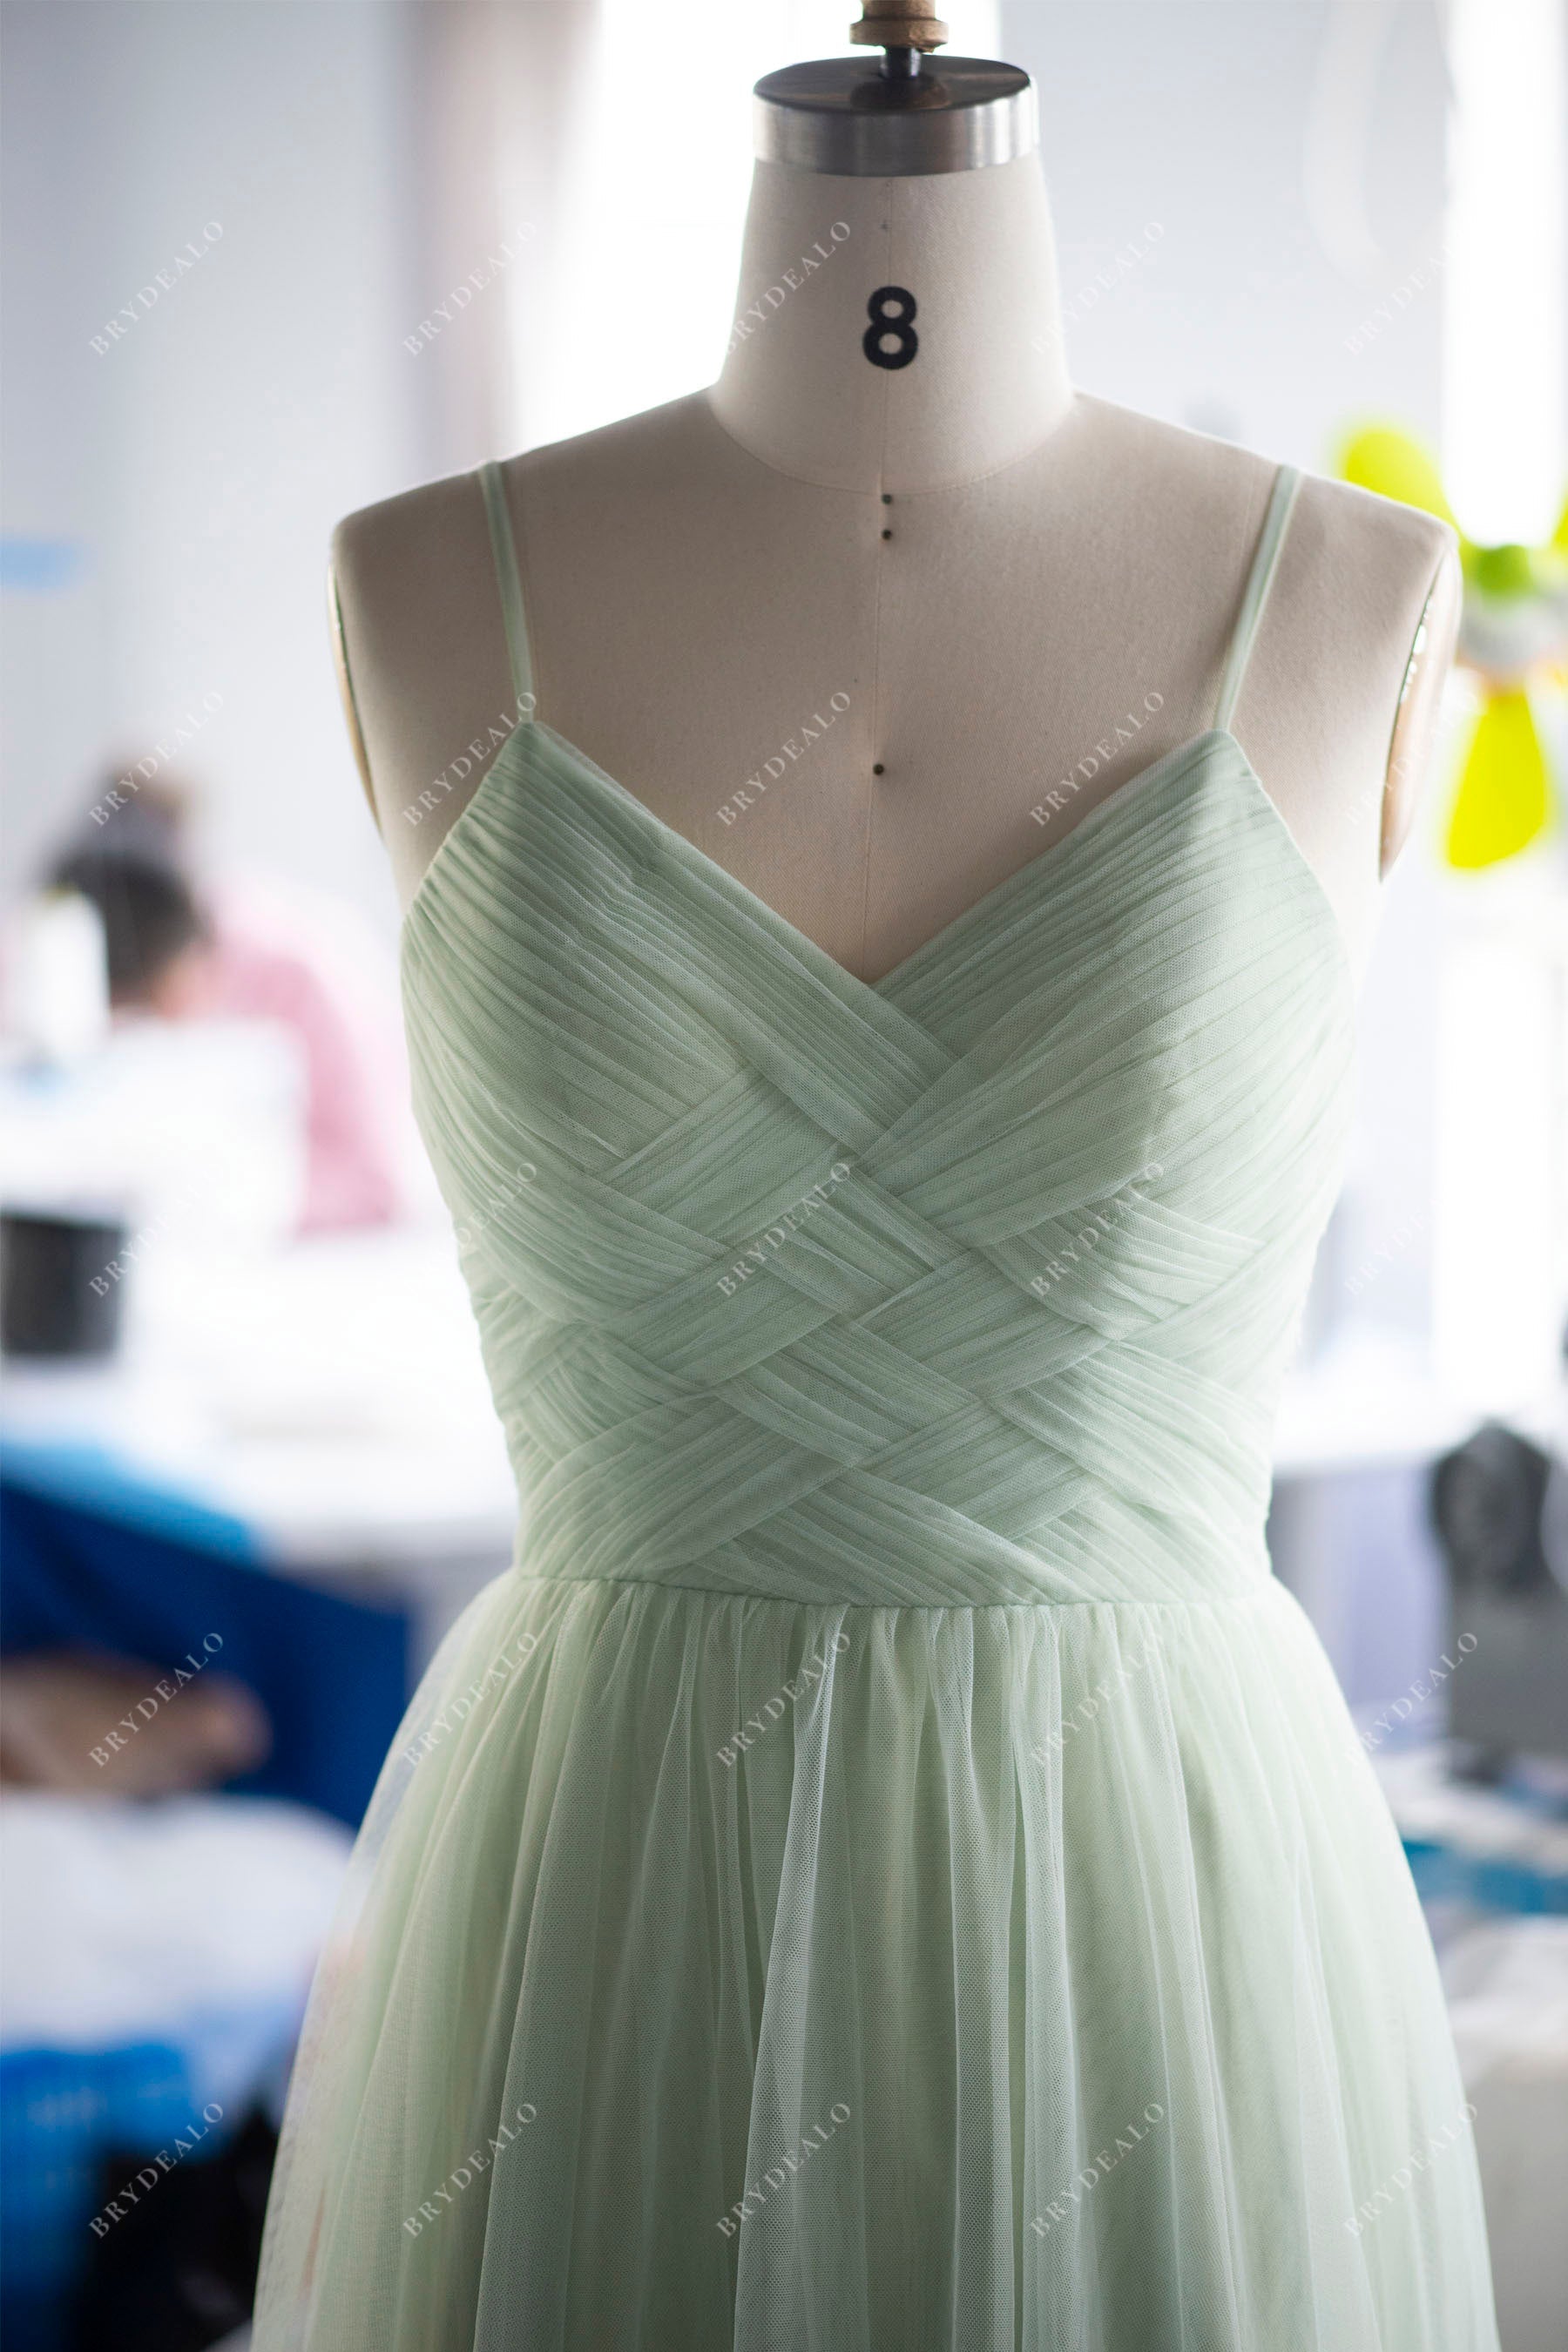 Wholesale Mint Green Lace Tulle Thin Strap Weave Bridesmaid Dress